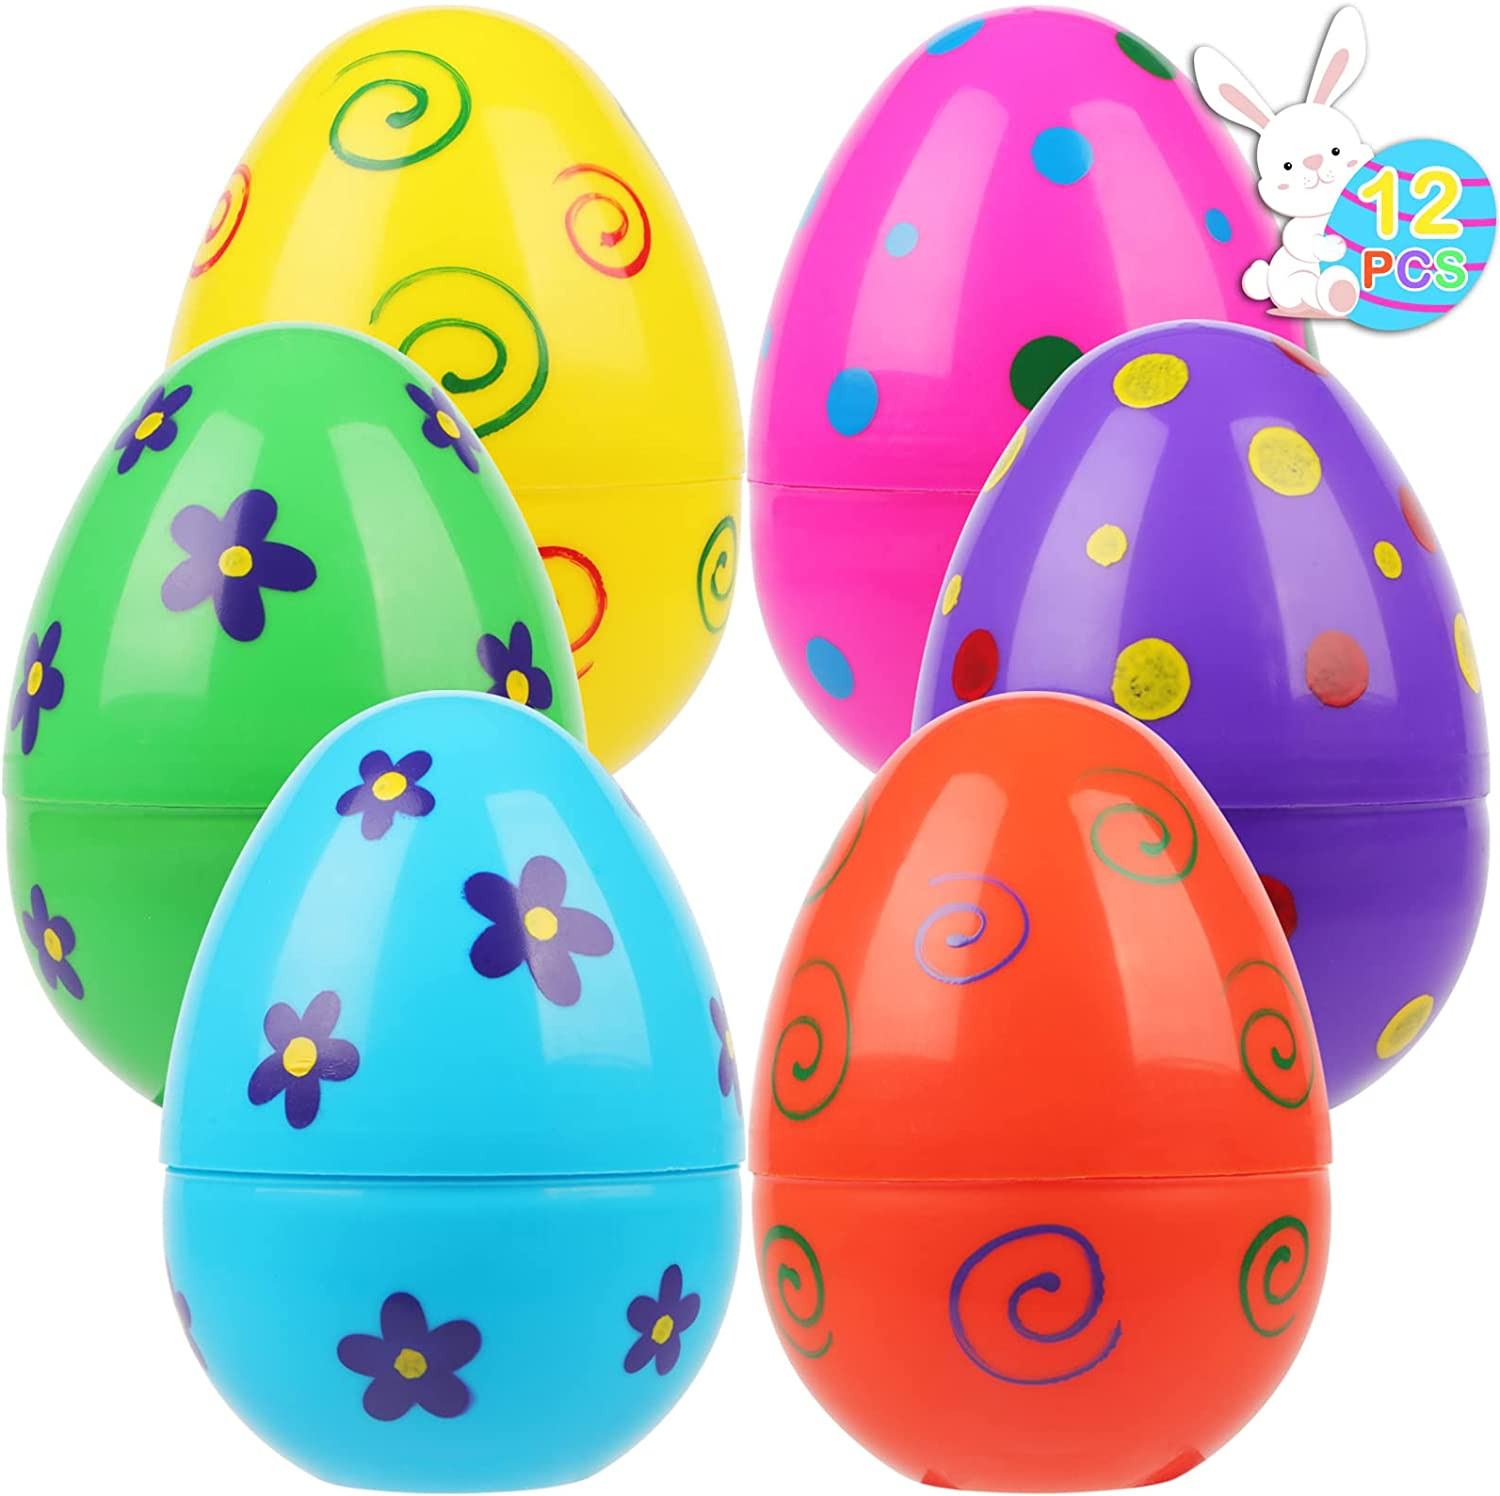 12 Pcs Plastic Printed Bright Jumbo Easter Eggs-Assorted Prints and Colors 6\